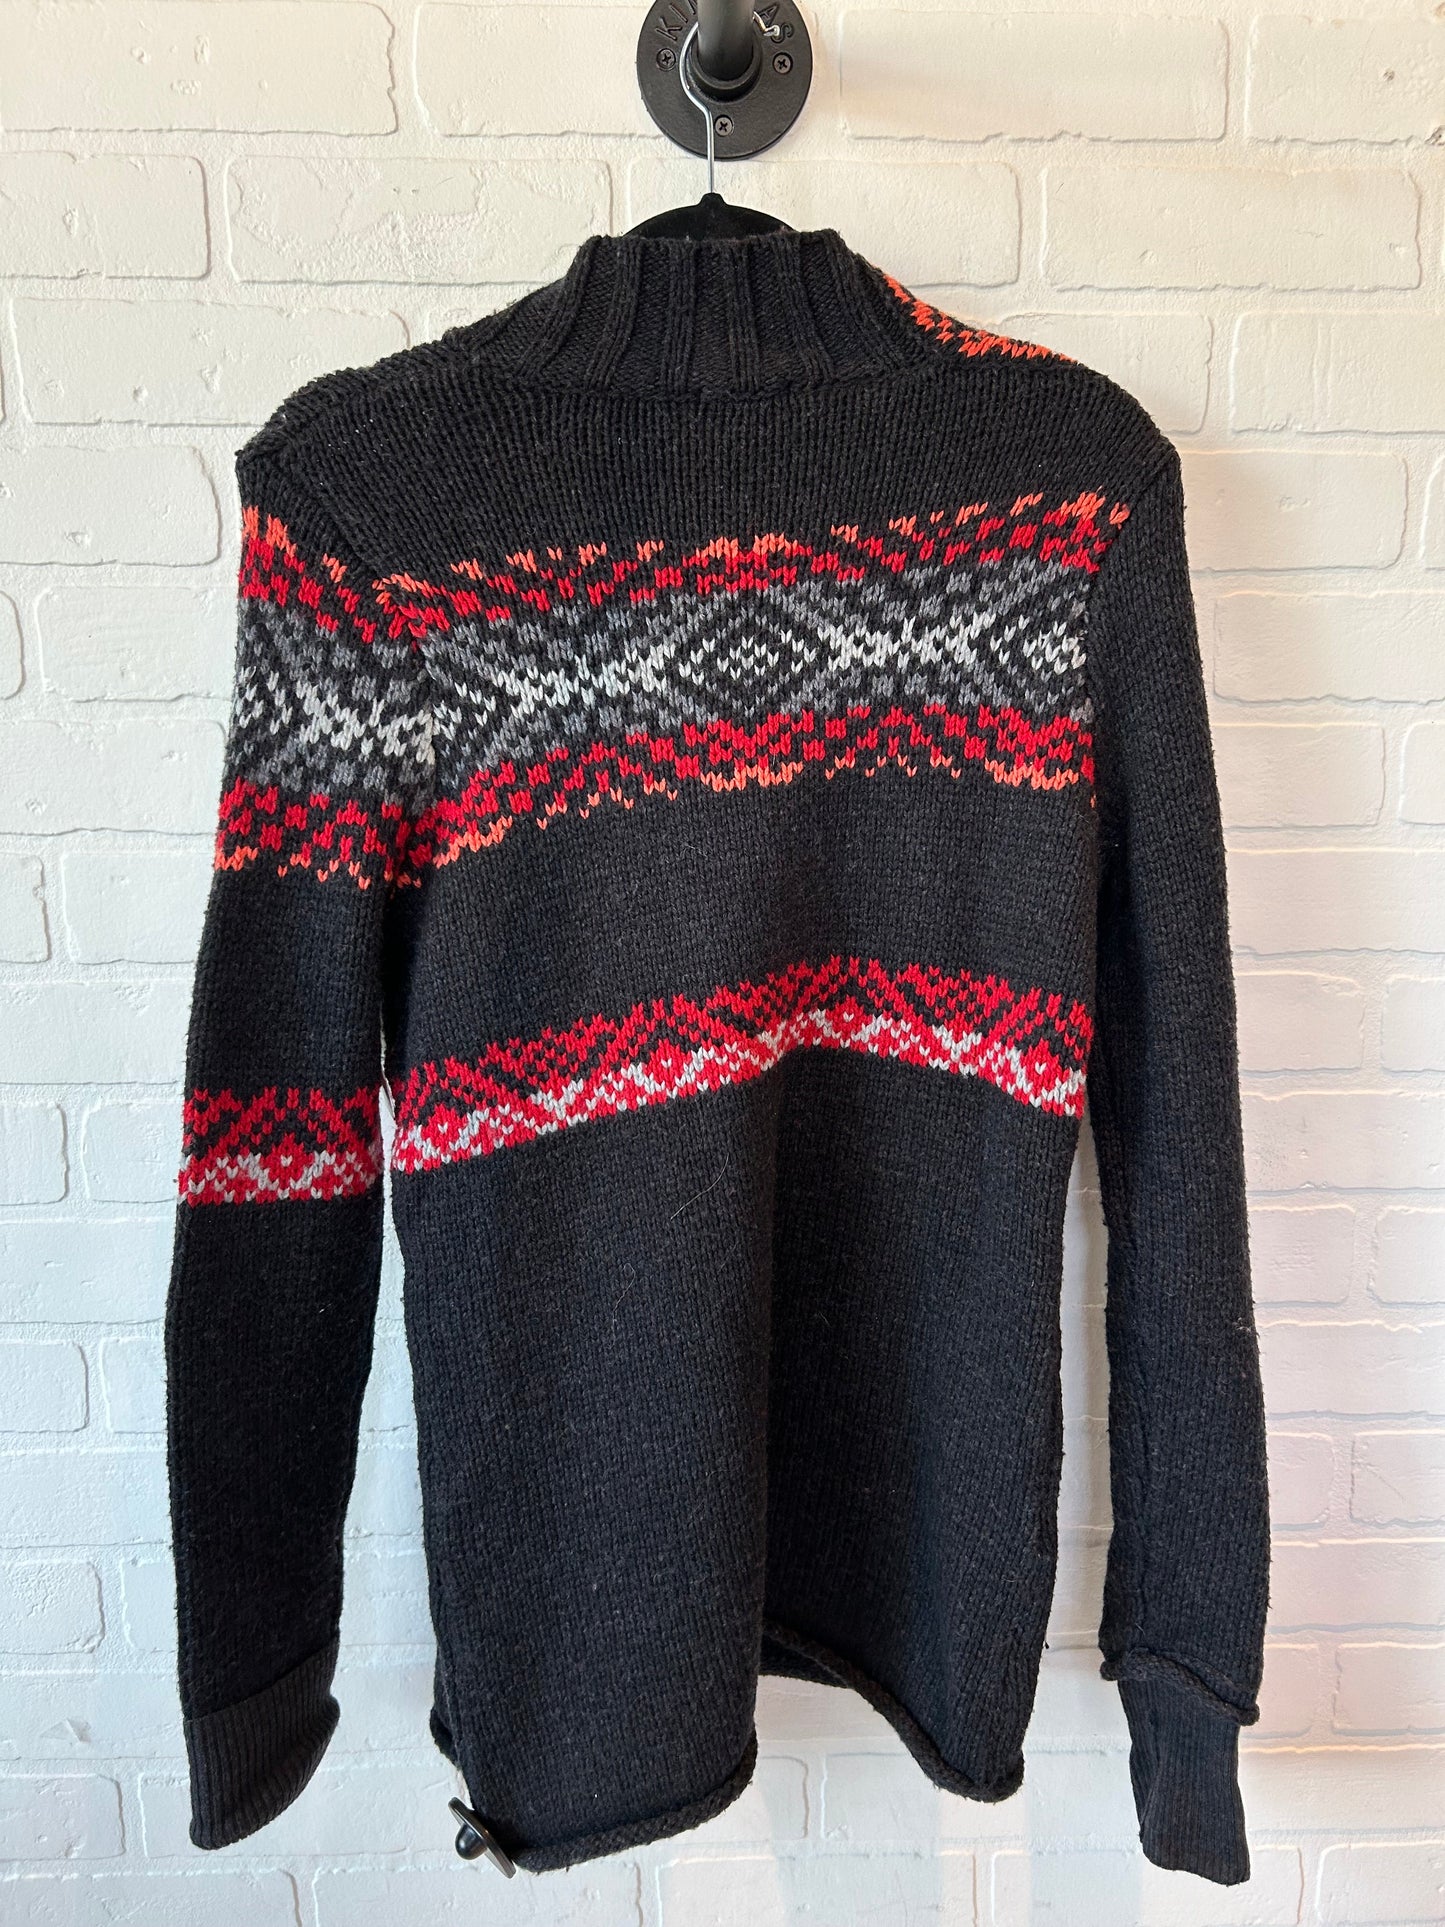 Multi-colored Sweater Chup, Size M